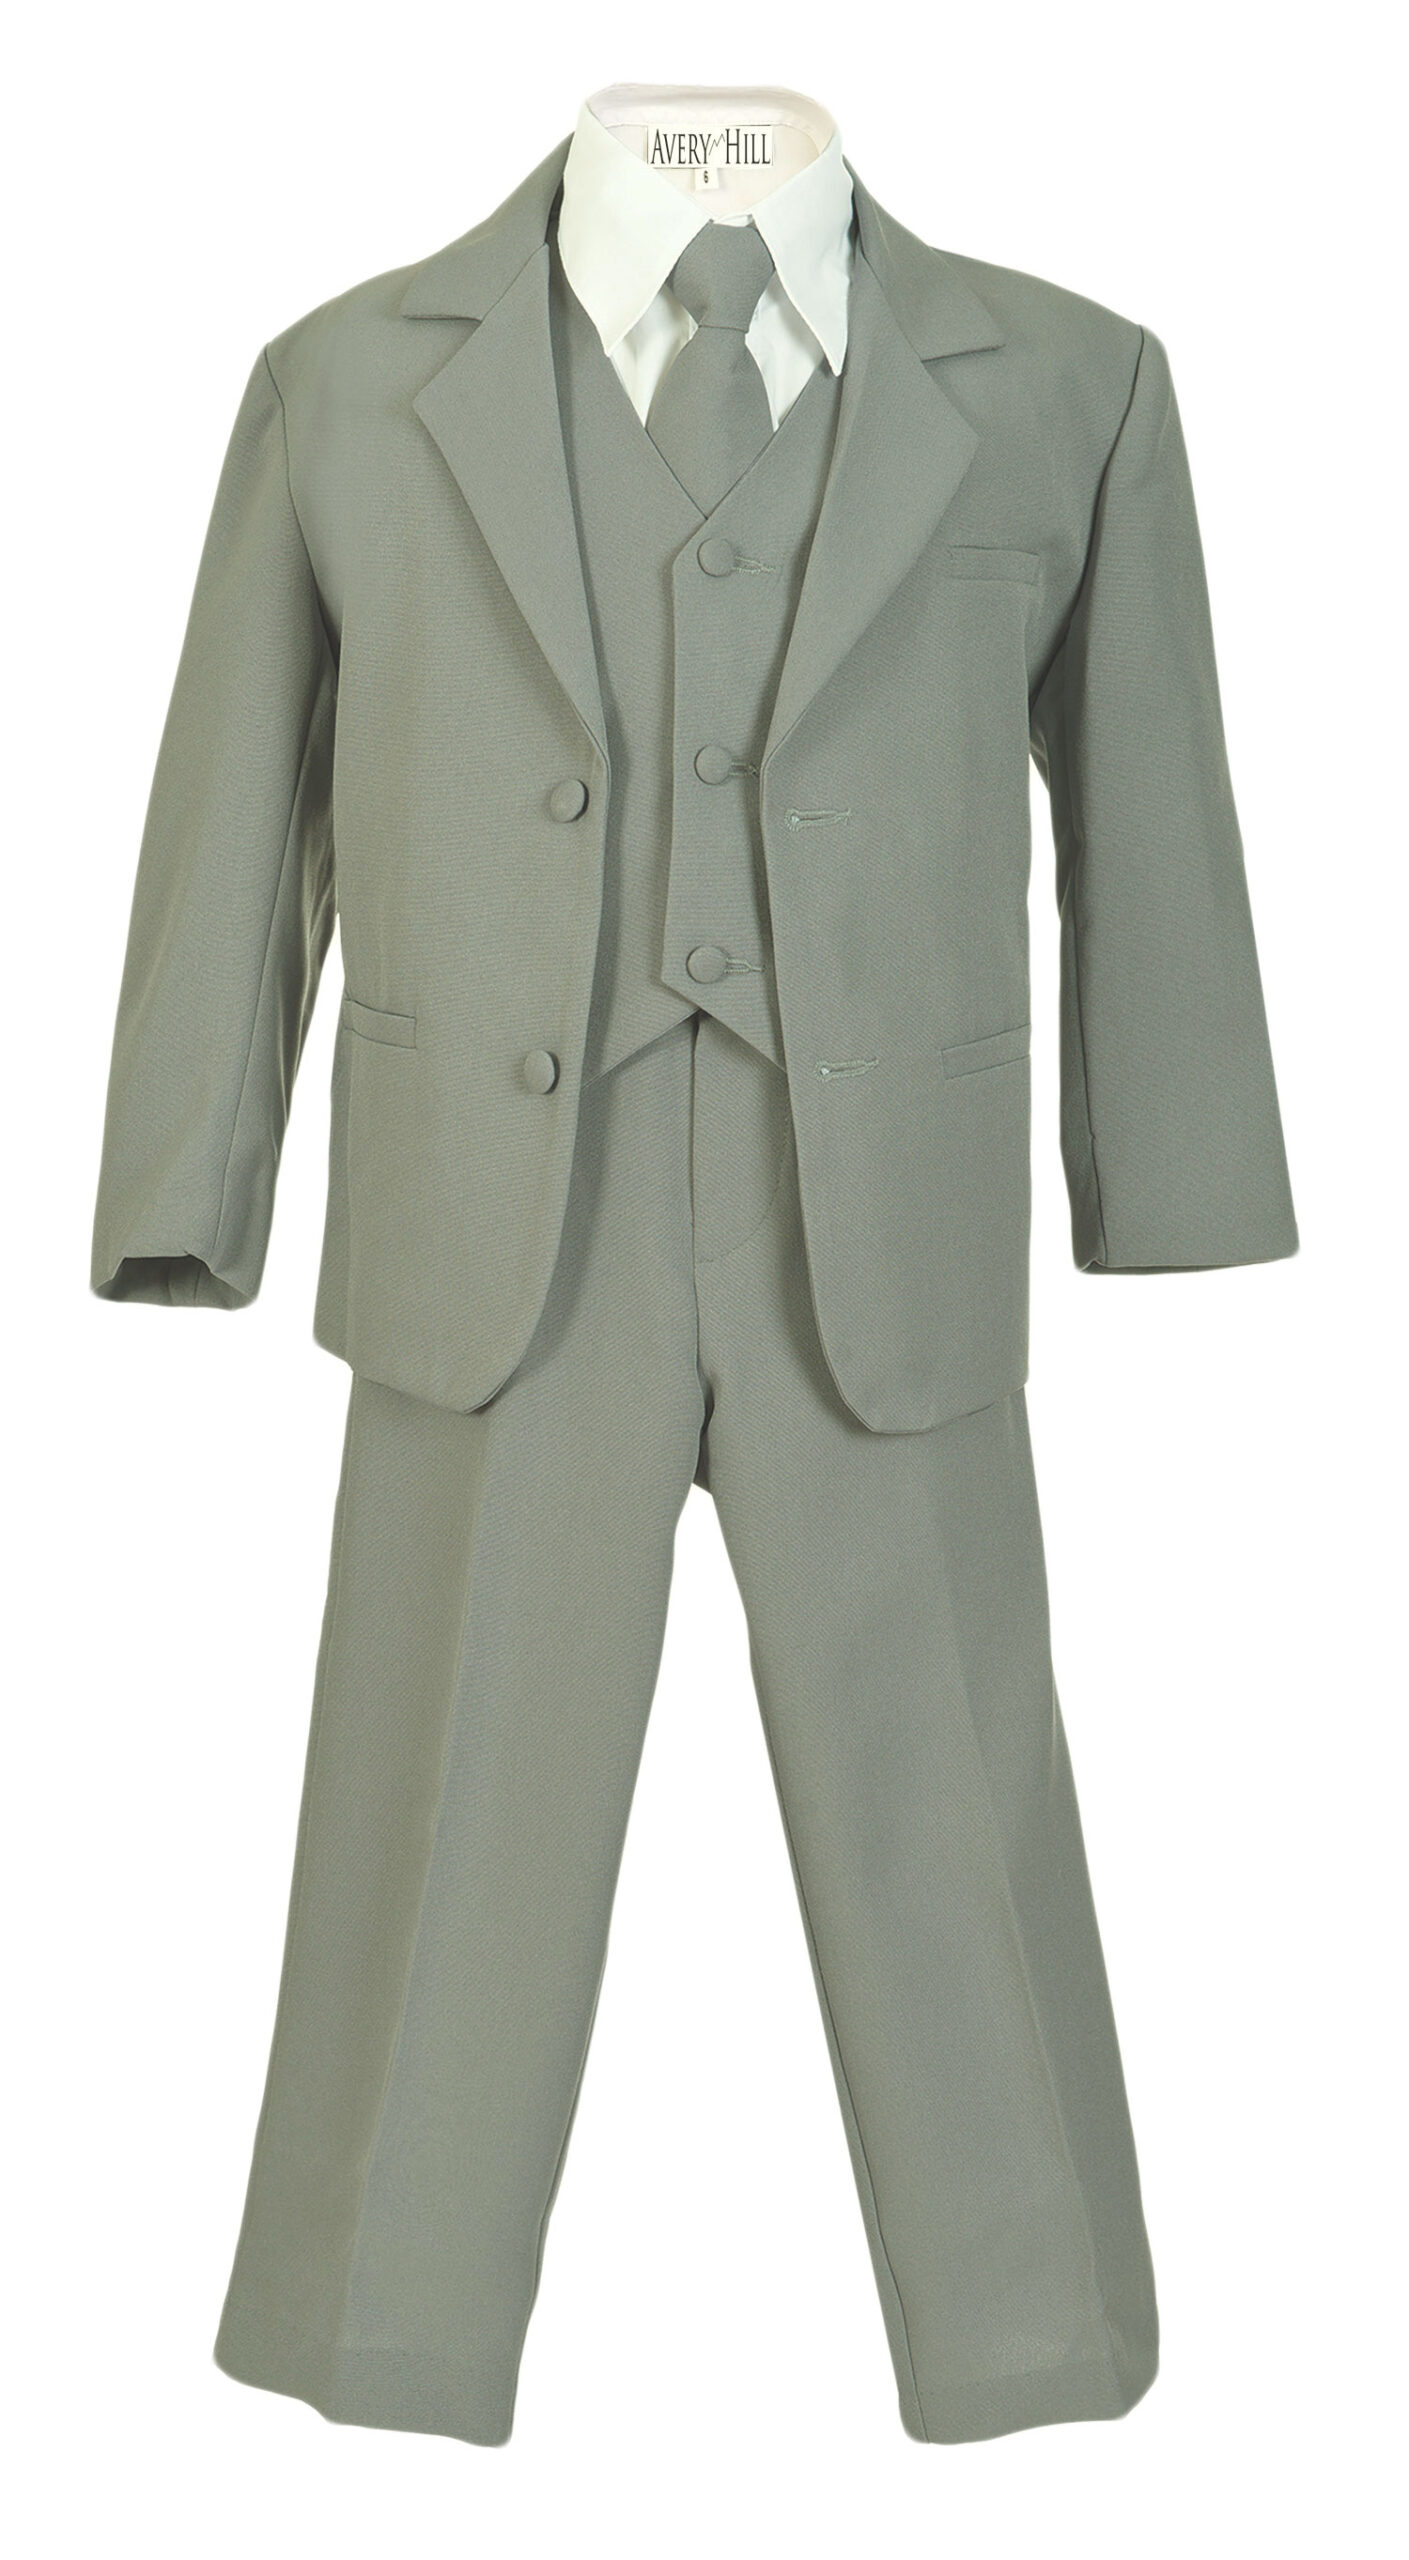 Avery Hill Boys Formal 5 Piece Suit with Shirt and Vest Silver White - 5